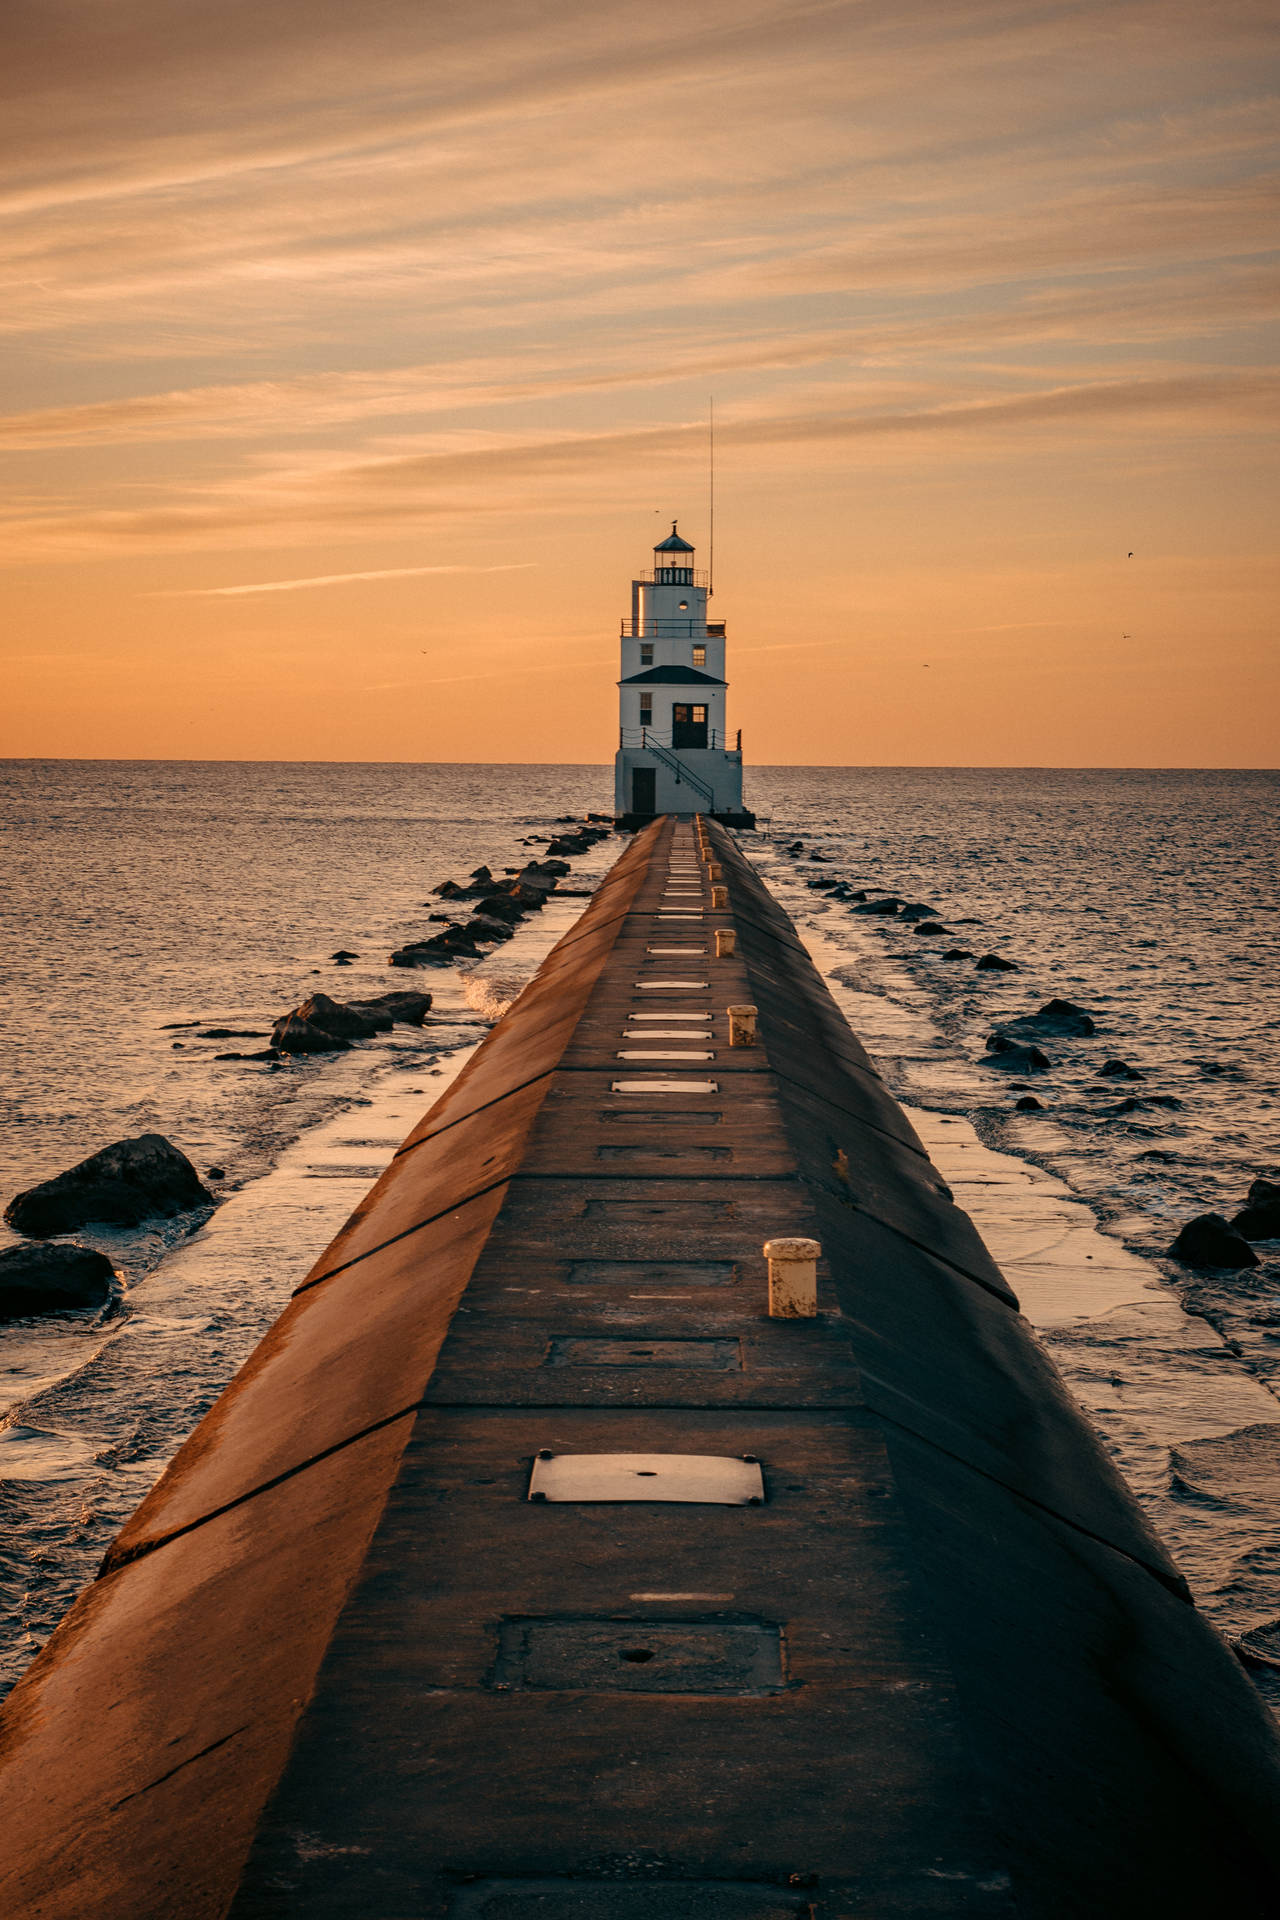 Lighthouse Scenery For Iphone Screens